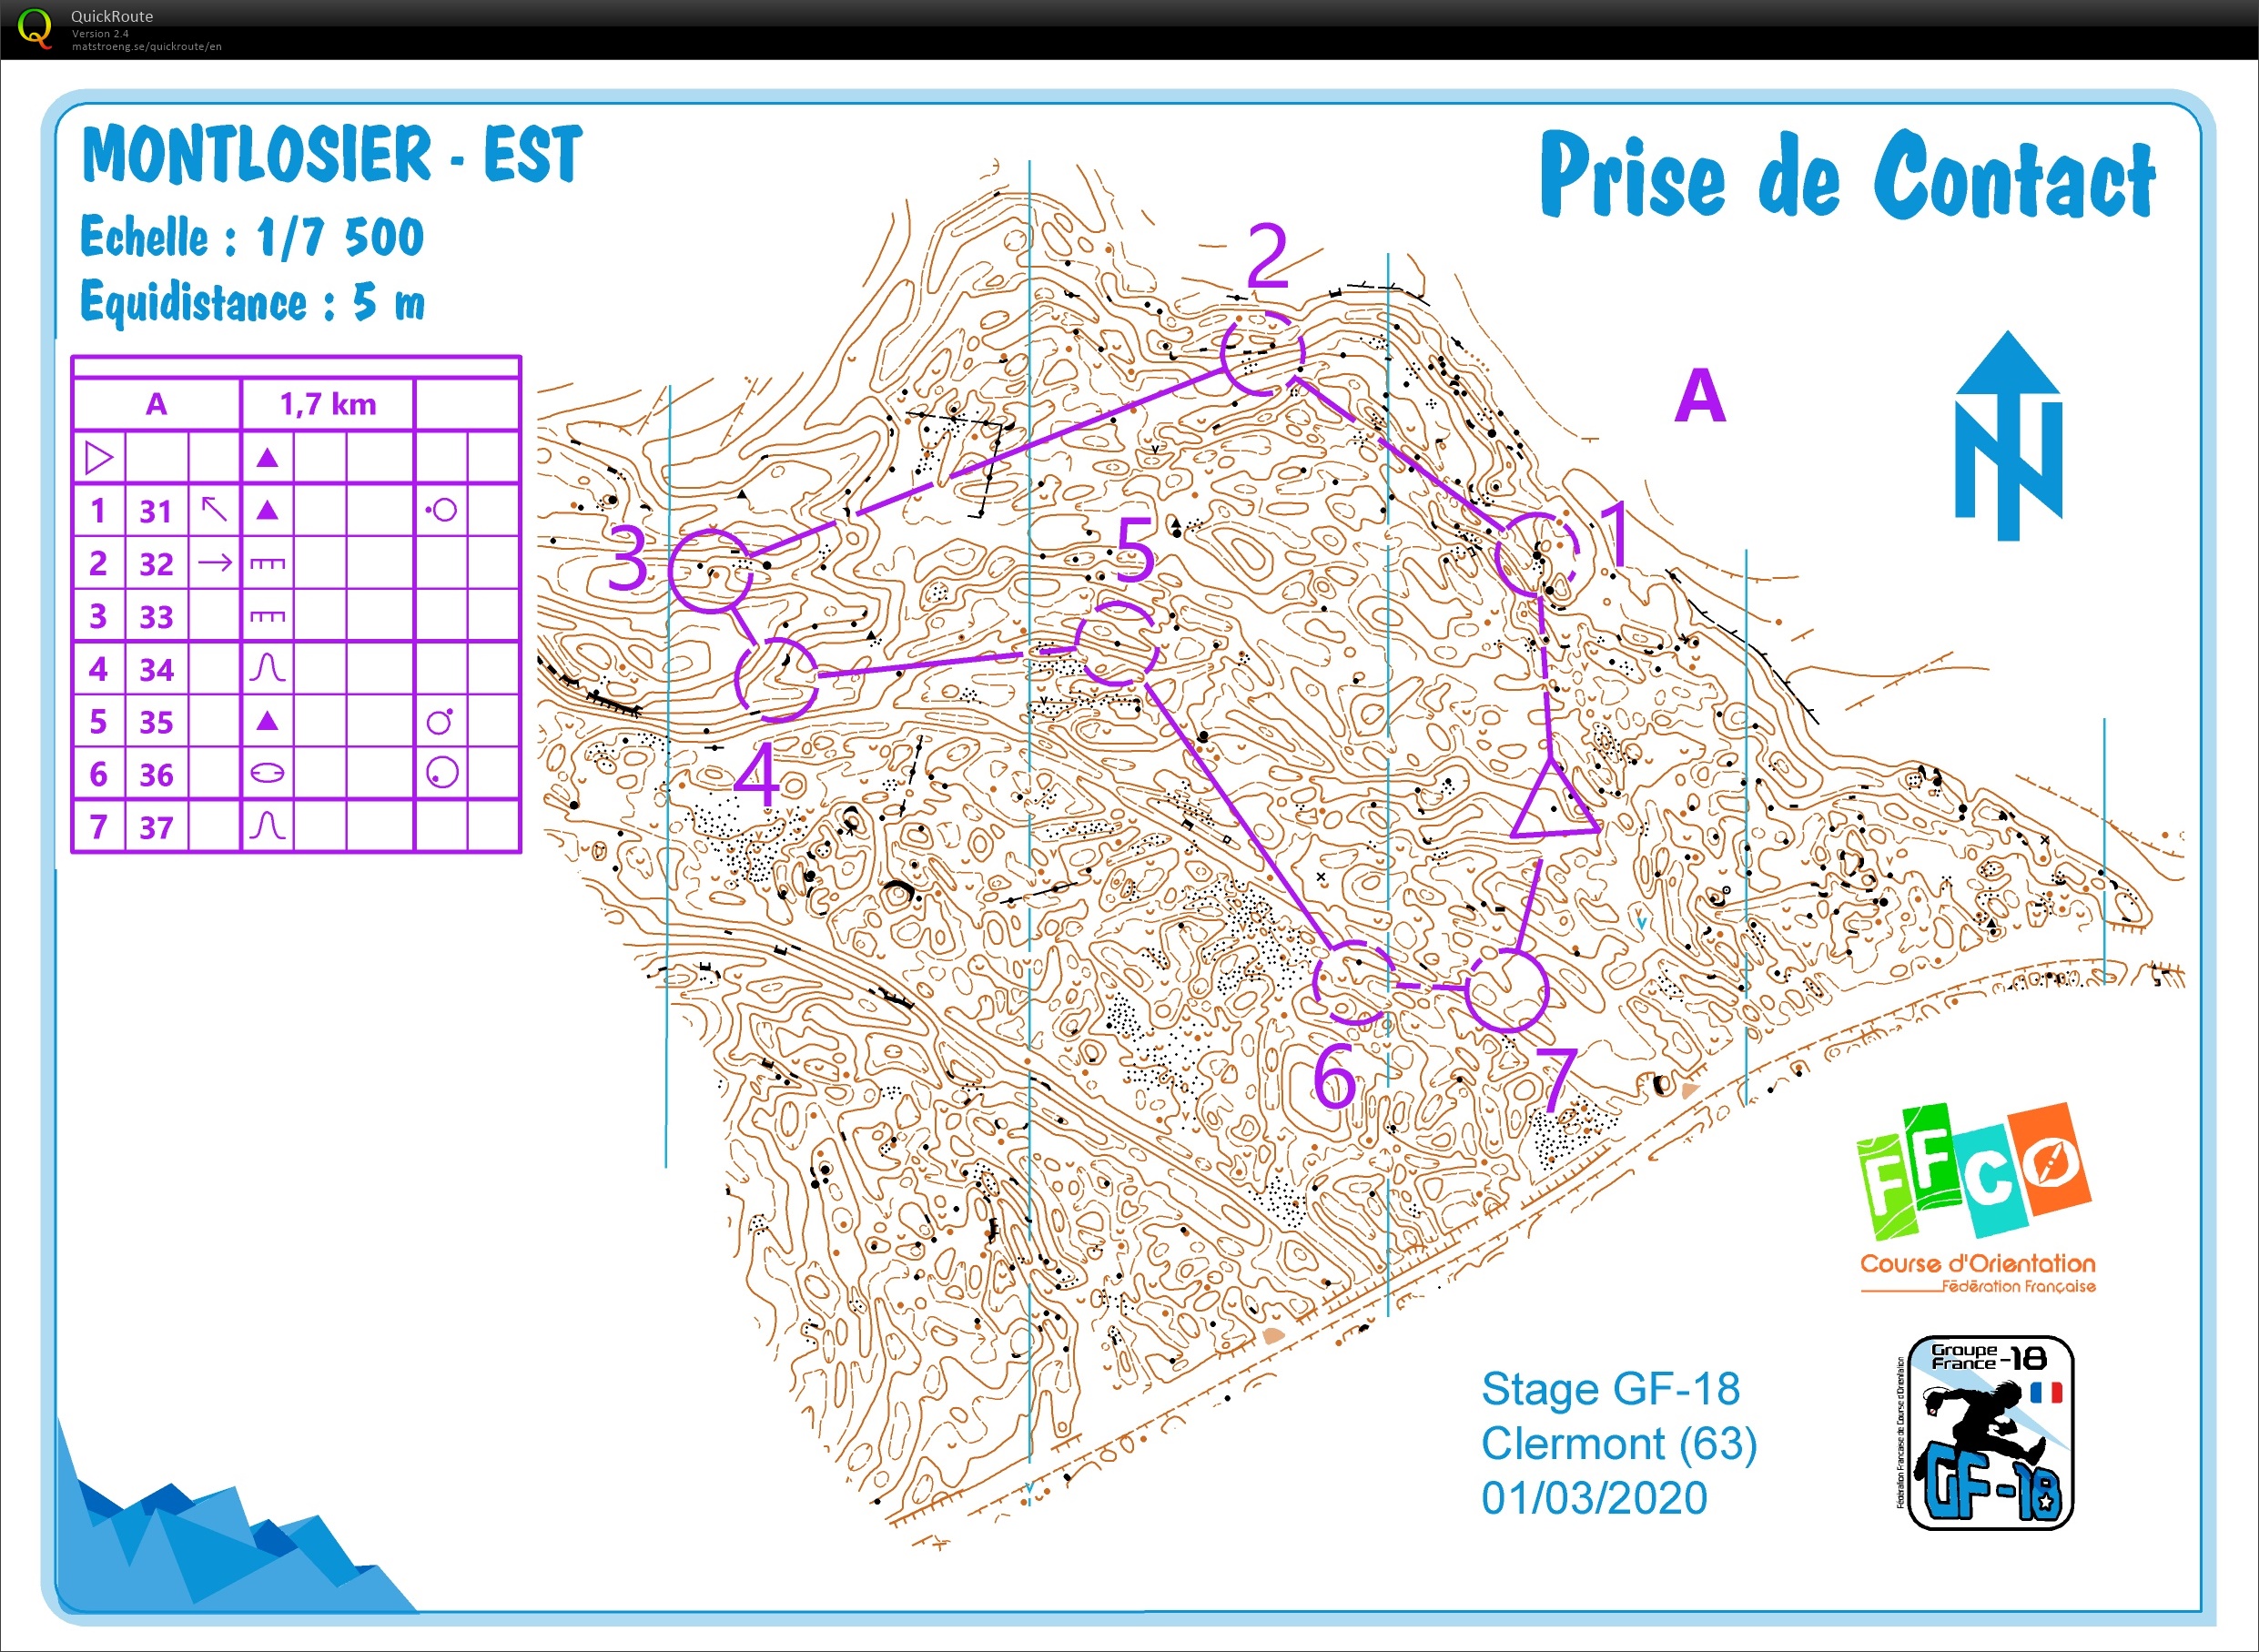 Stage gf-18 Clermont (2) relief A (2020-03-02)